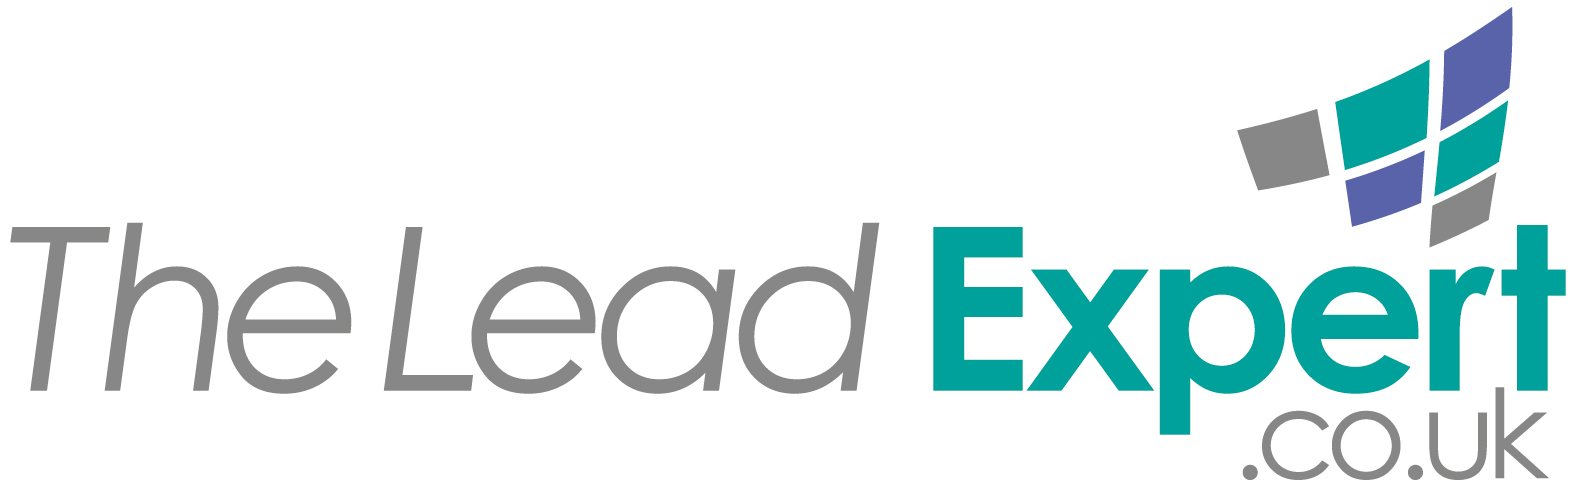 TheLeadExpert - Delivering low cost leads